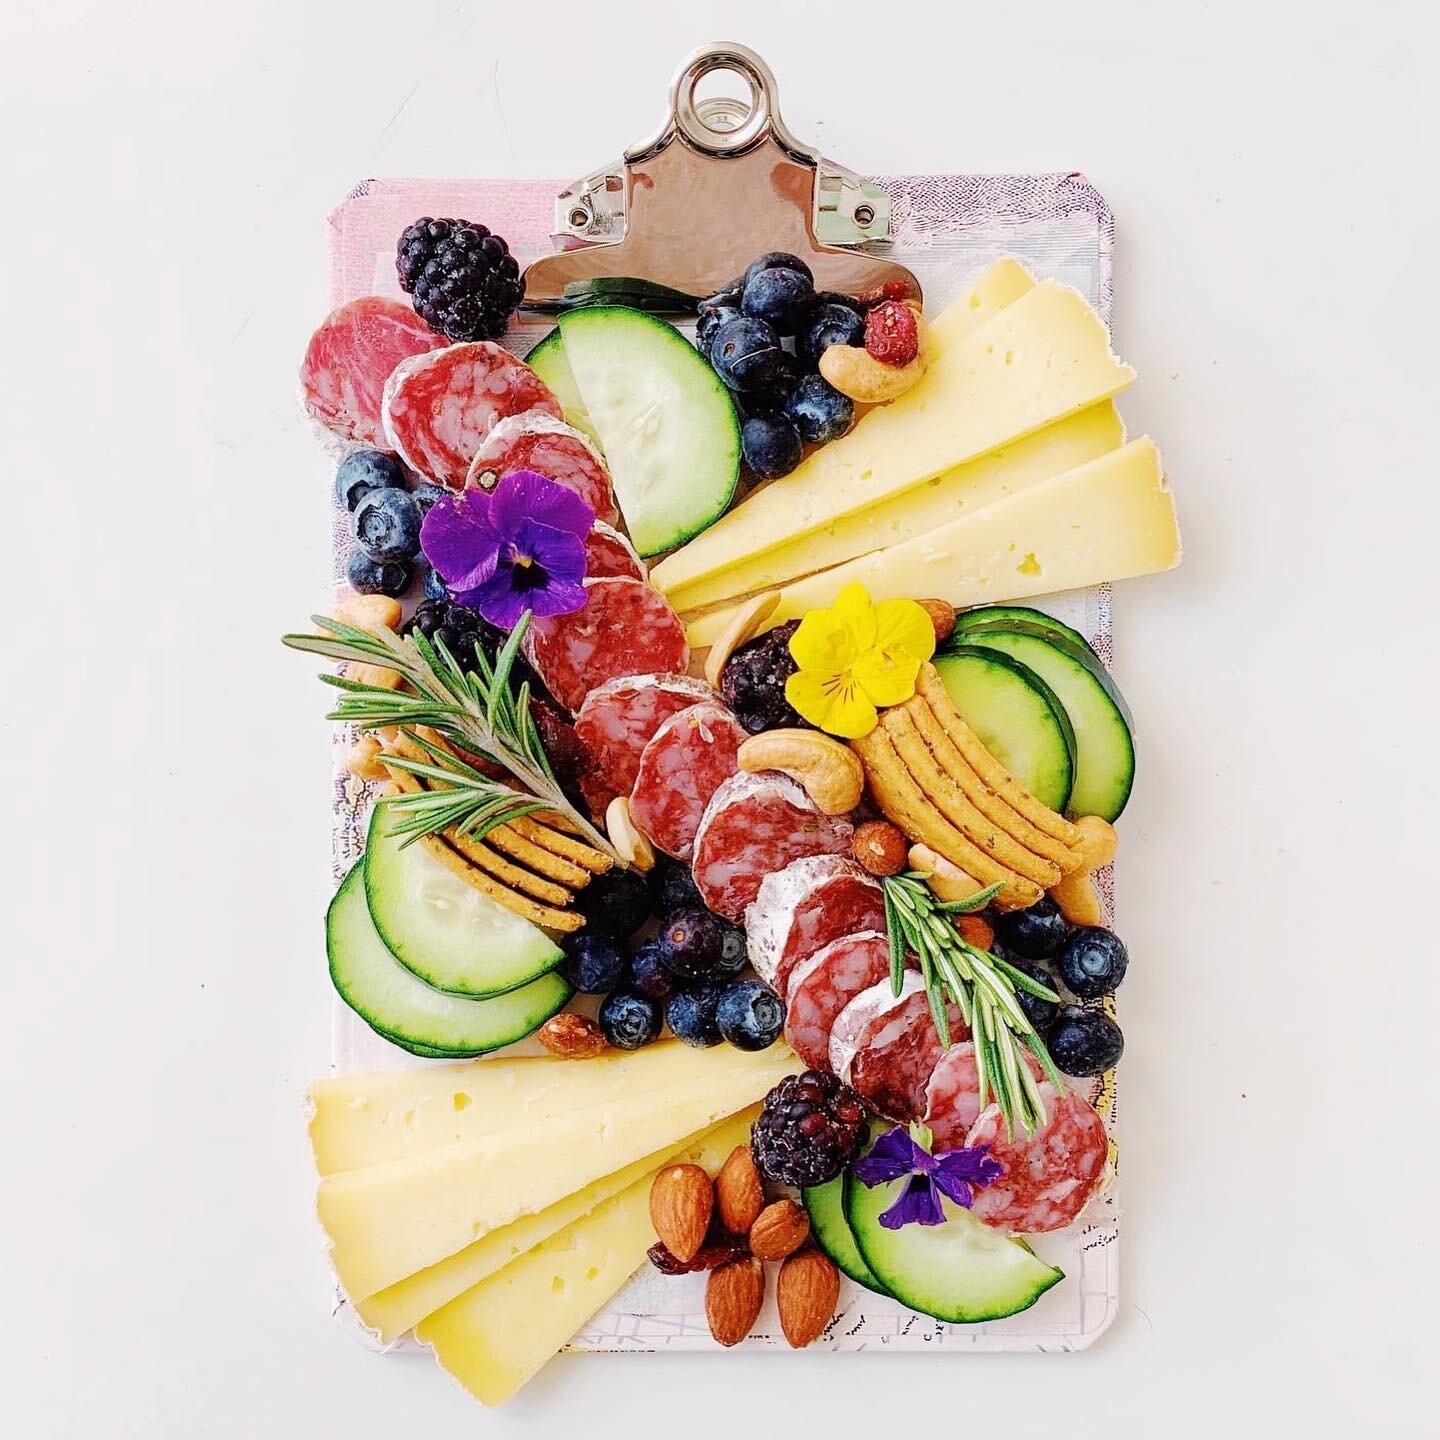 SWIPE TO BUILD ➡️ That &ldquo;Board Meeting&rdquo; Plate for back to school season.&nbsp;&nbsp;This is how you use a clipboard, right? 😉

KEY⁣
1 - CHEESE: Stella Vallis from @chaseholmfarm ⁣
2 - MEAT: Salami River
3 - PRODUCE: Cucumbers, Blueberries